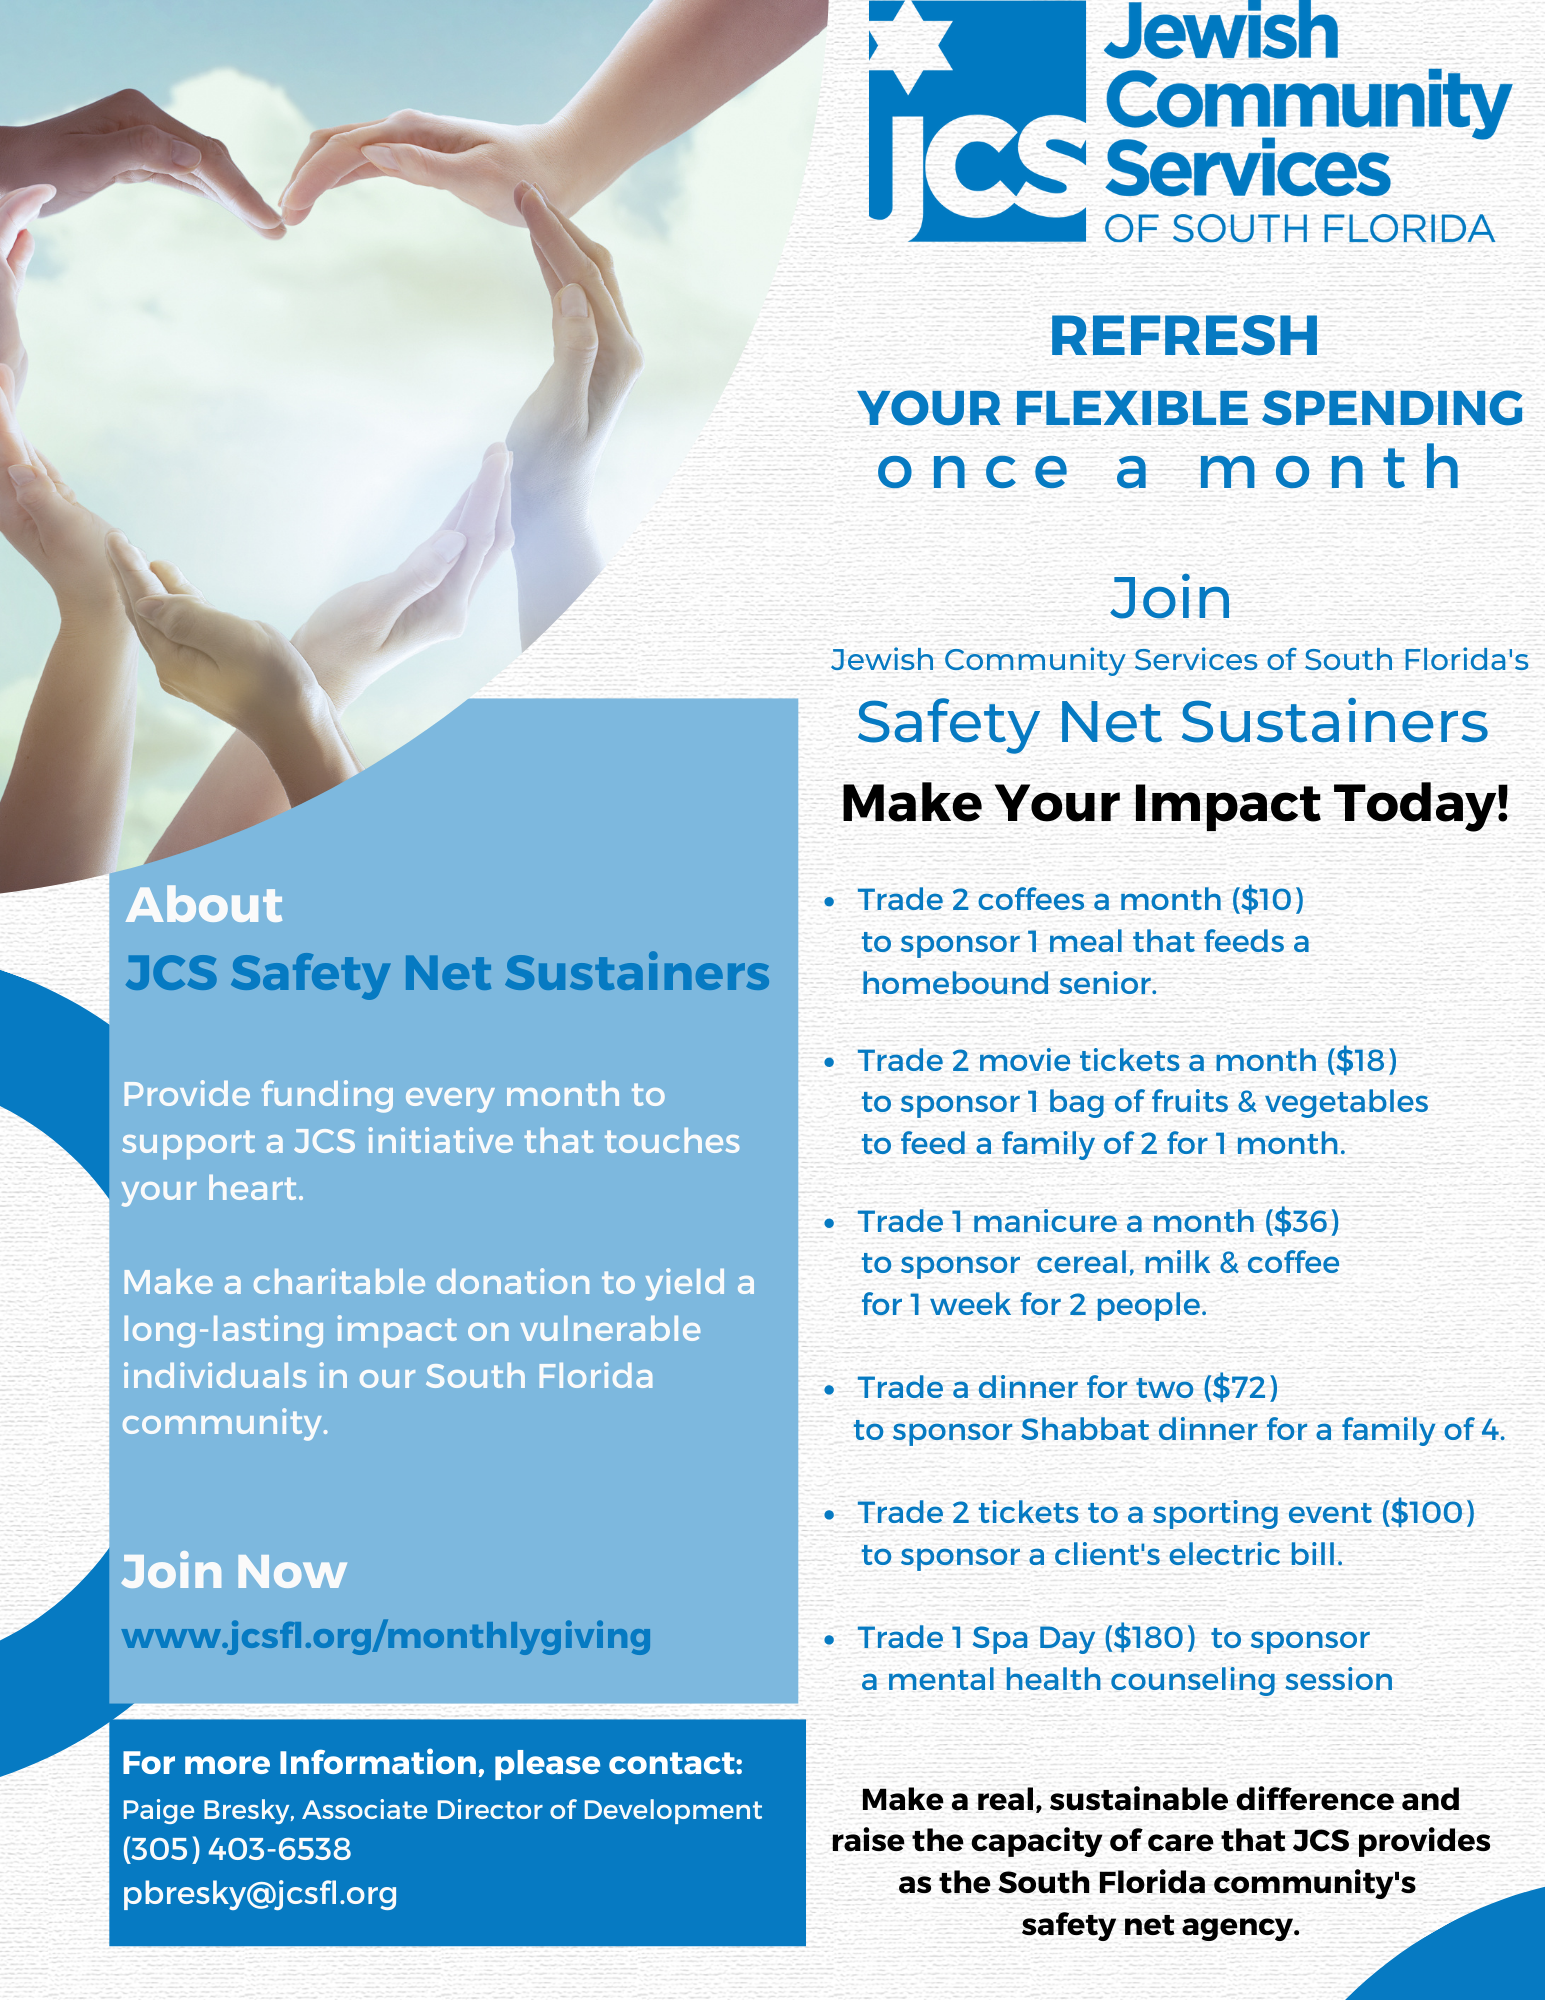 JCS Safety Net Sustainers